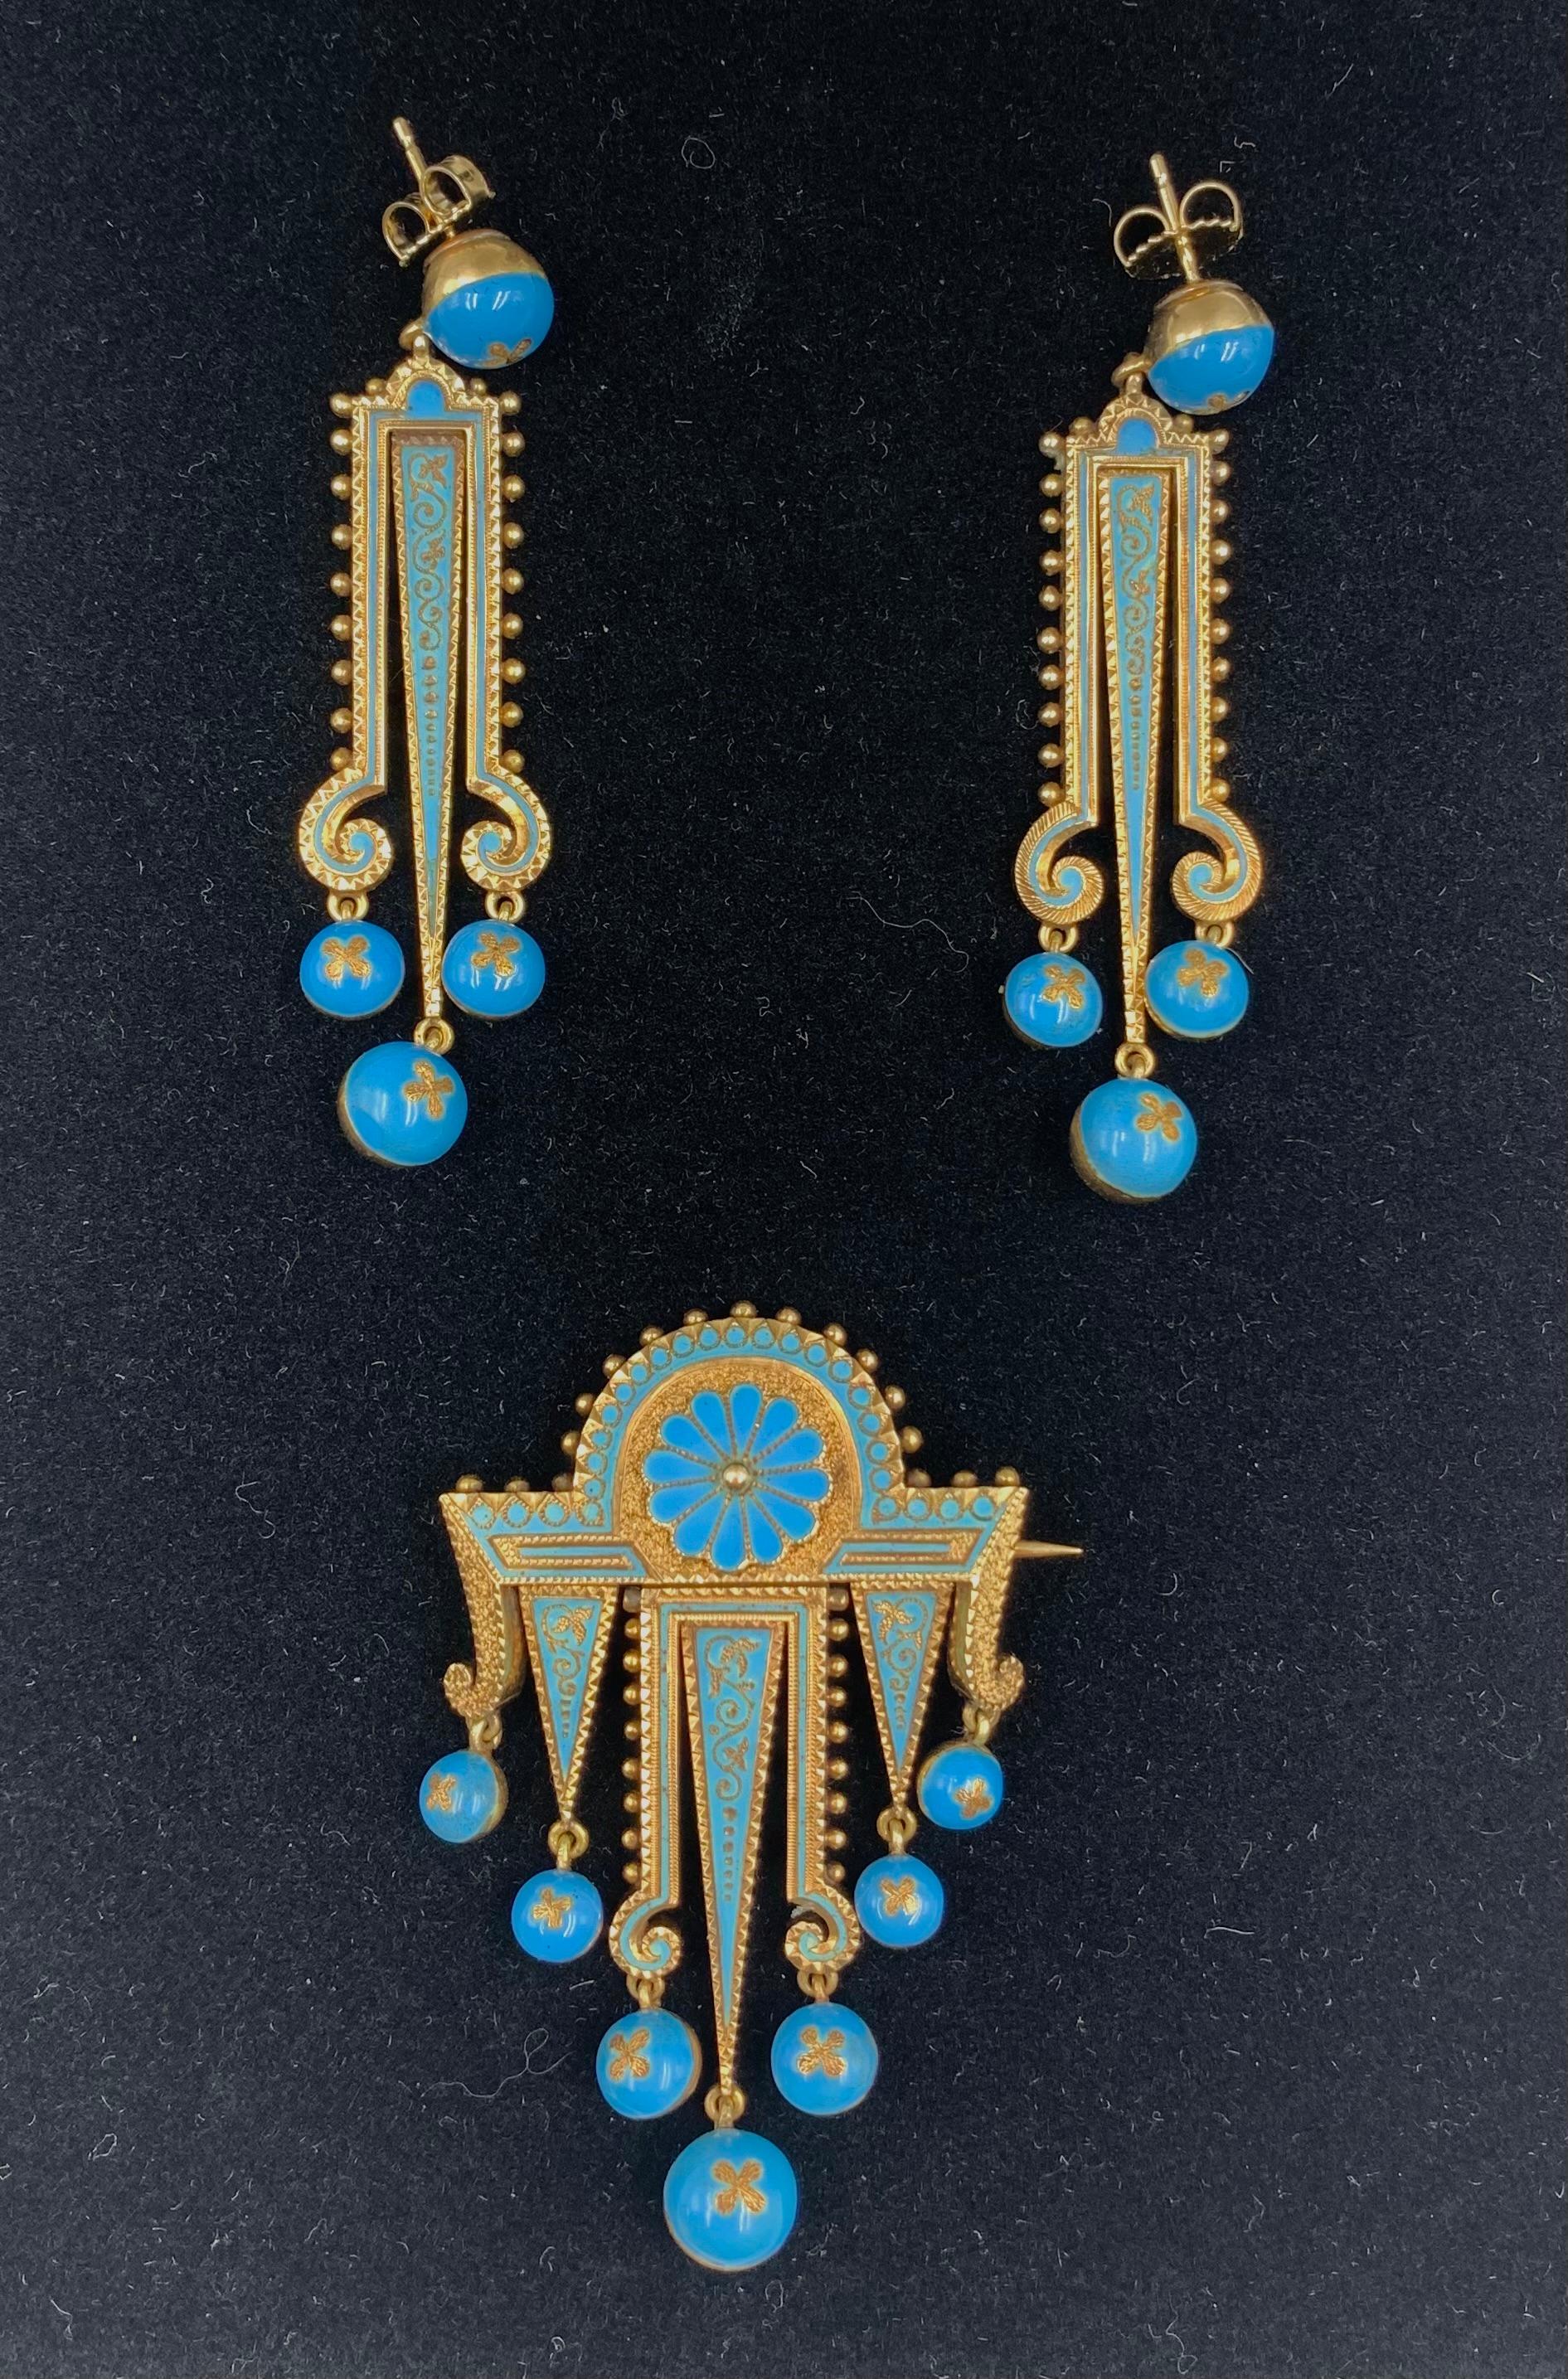 Exquisite museum quality 19th century Etruscan Revival turquoise enamel and articulated 14K yellow gold pair of earrings and brooch parure
Circa 1870
Beautiful design, large scale striking turquoise enamel suite of Archaeological Revival jewelry-